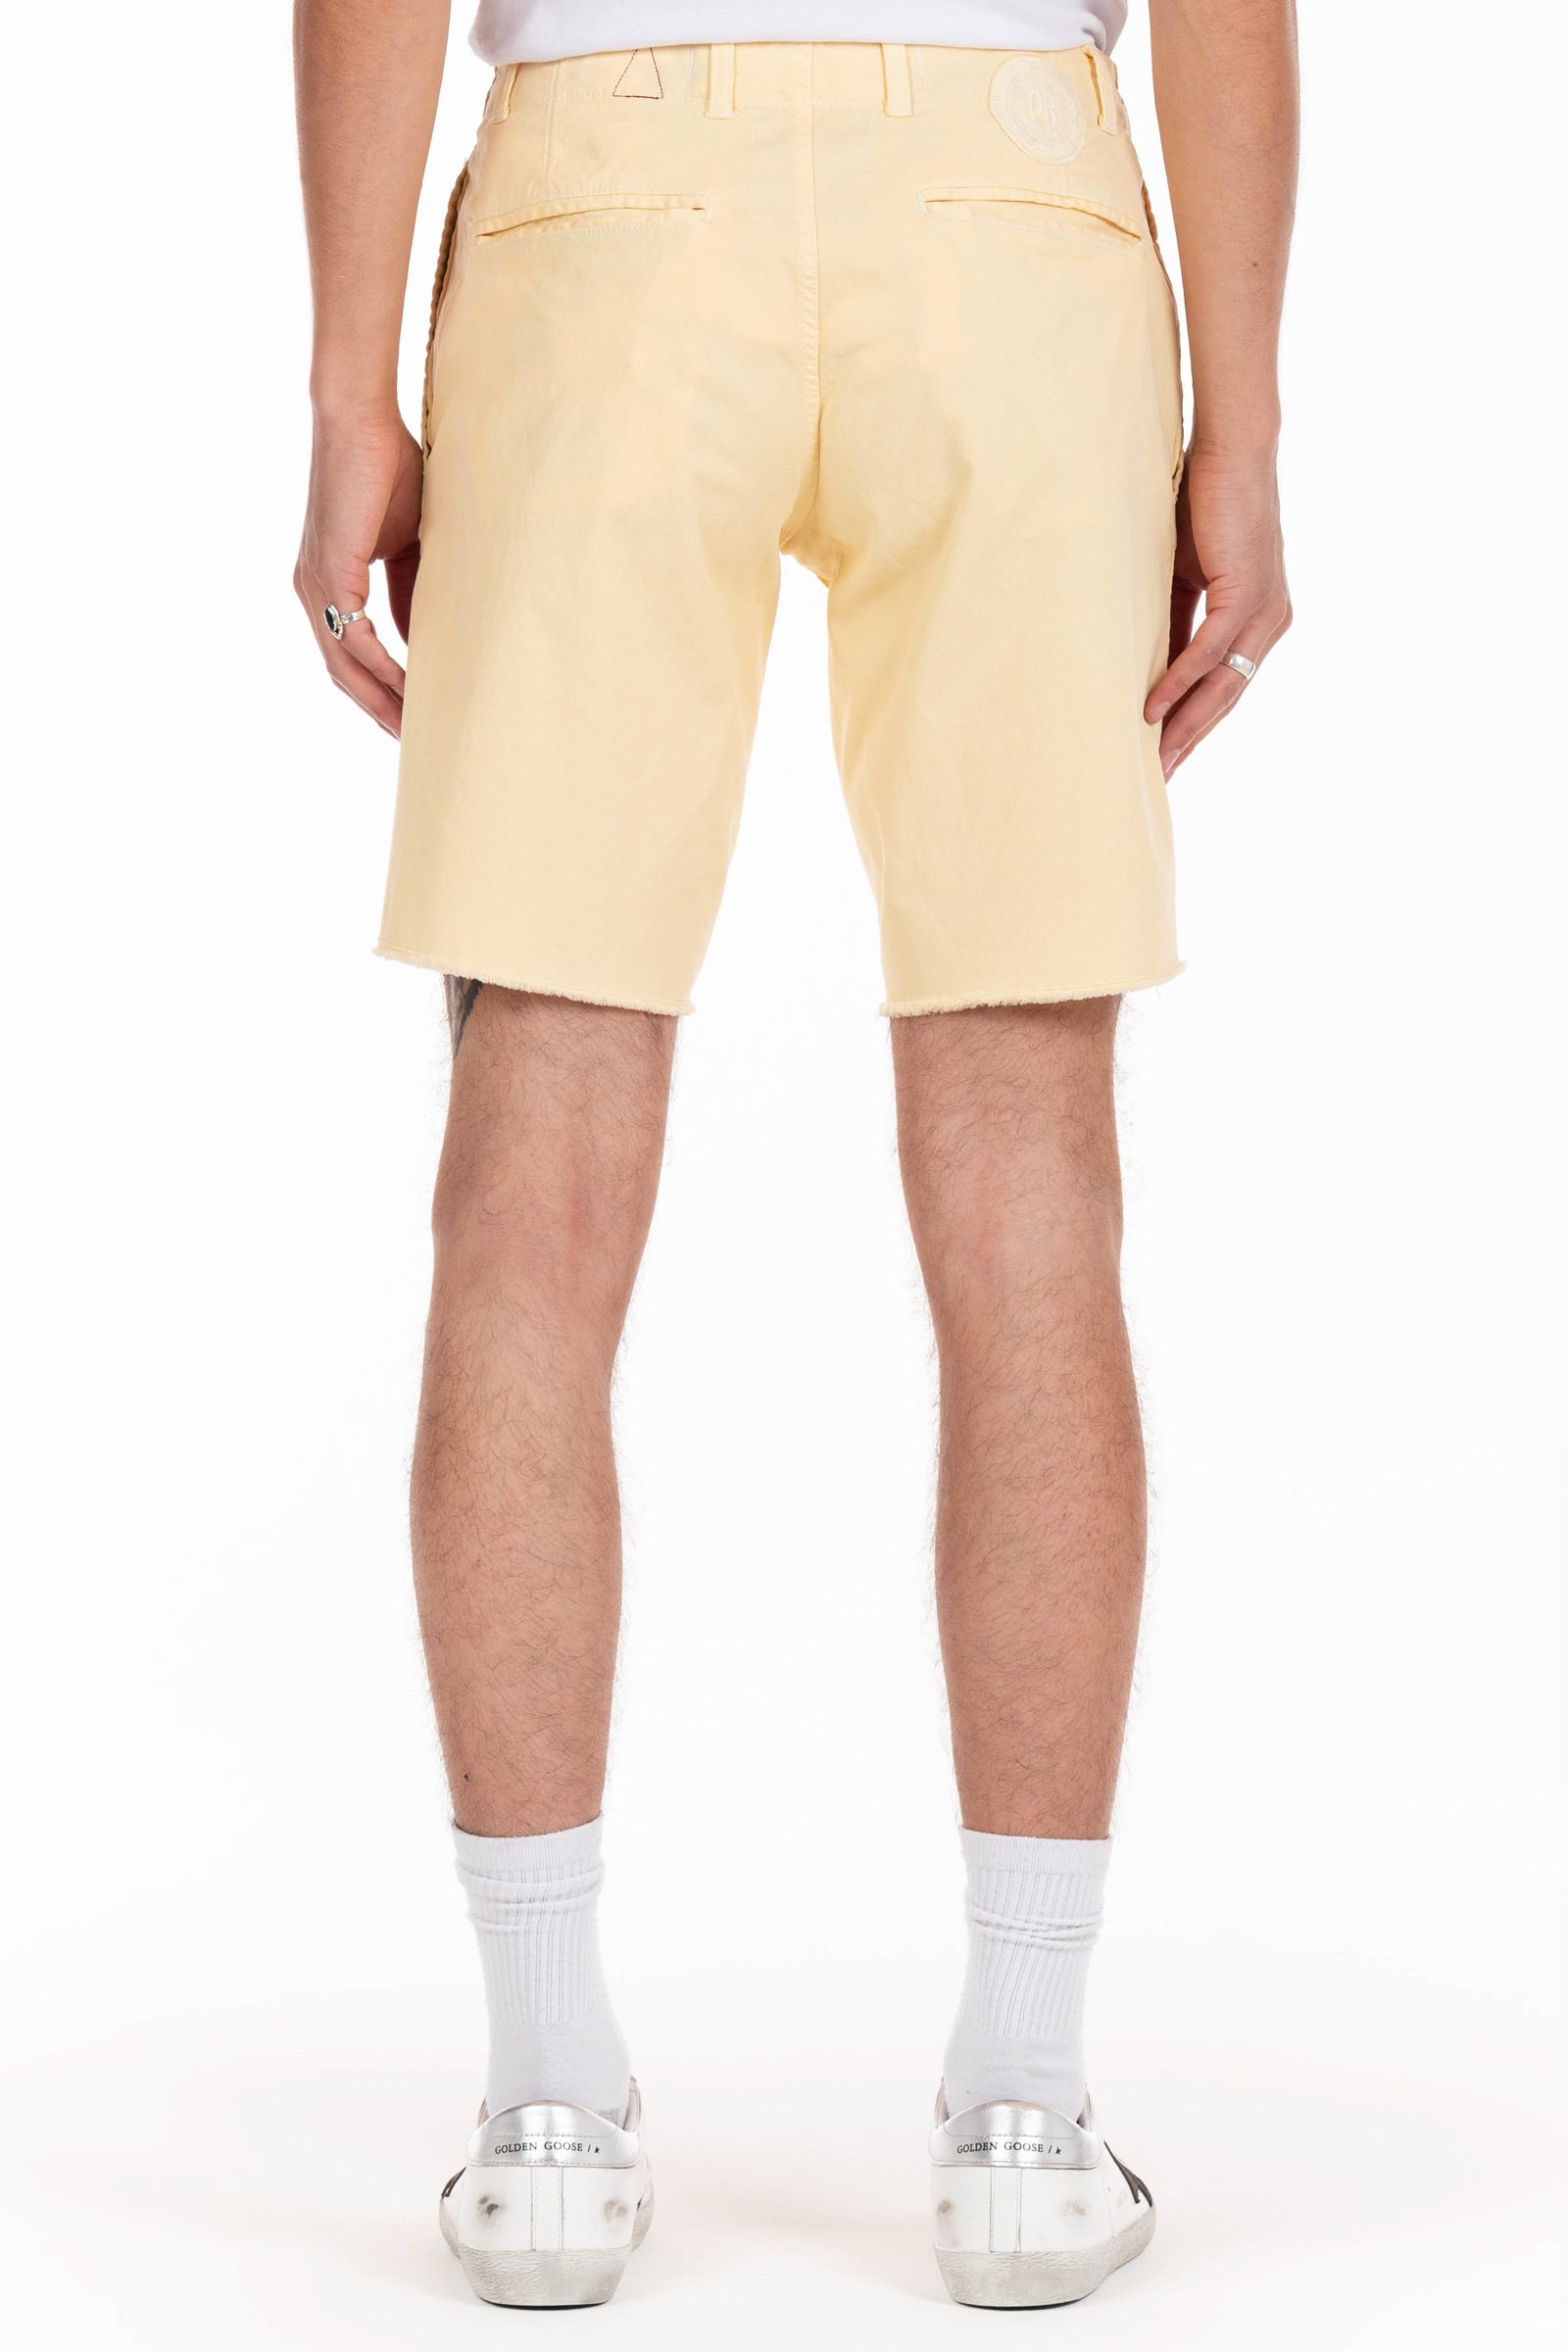 Original Paperbacks Rockland Chino Short in Custard on Model Cropped Back View